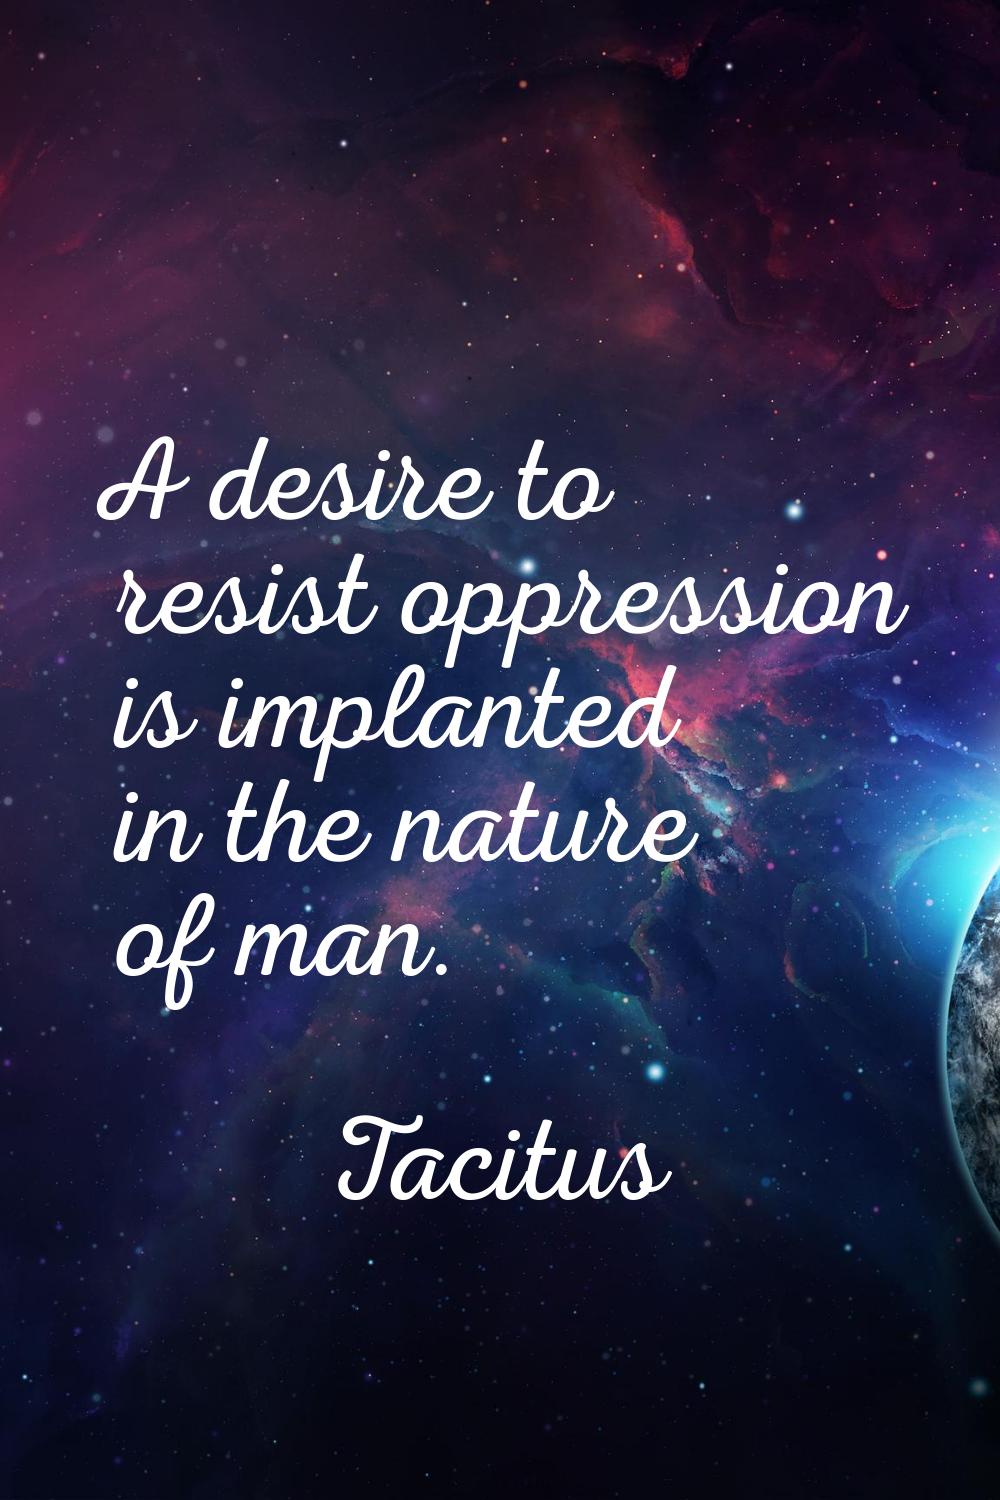 A desire to resist oppression is implanted in the nature of man.